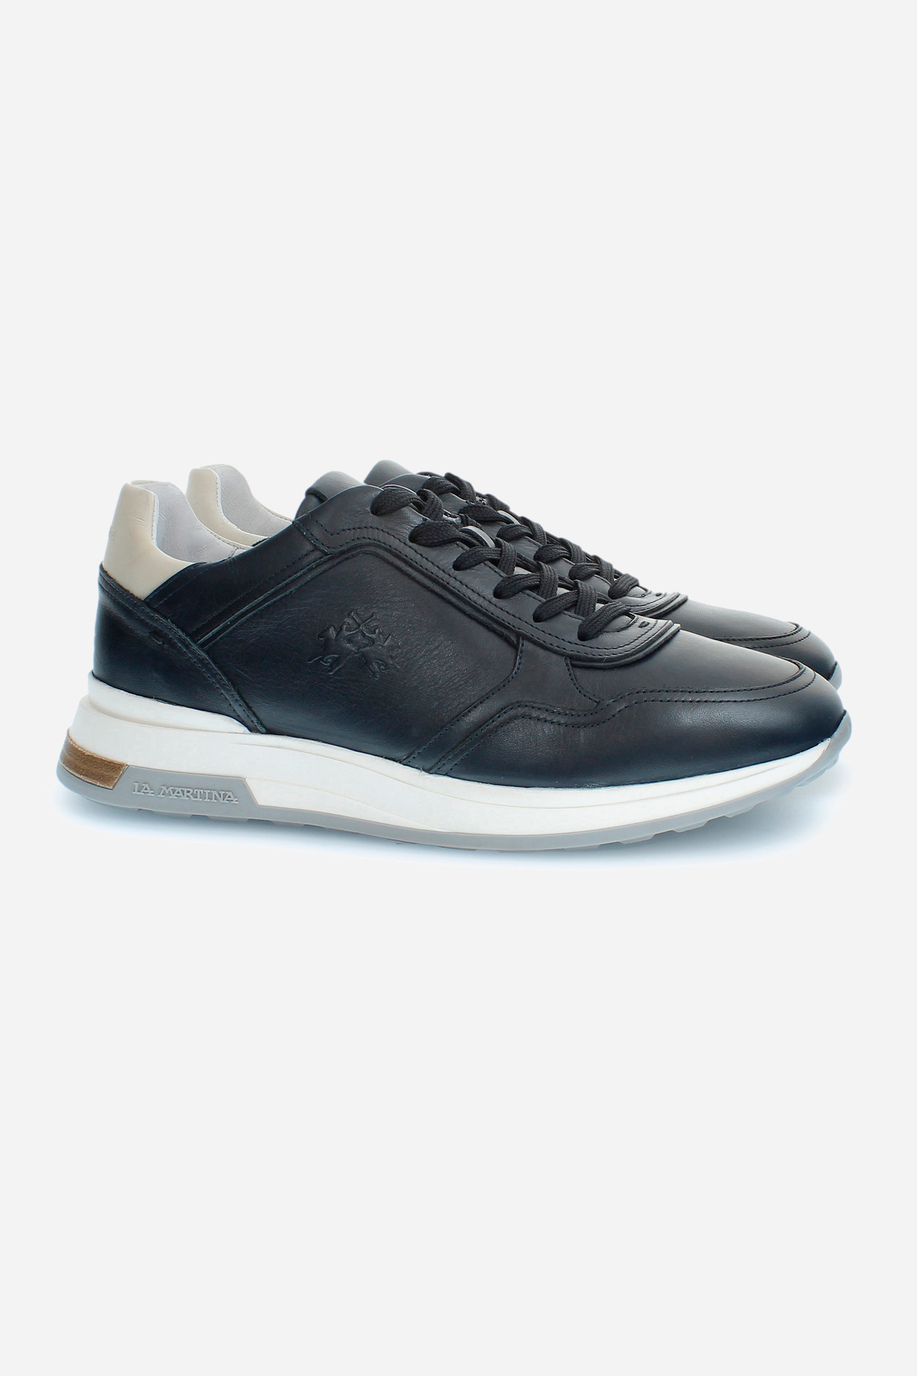 Men's trainers with raised sole - Shoes and Accessories | La Martina - Official Online Shop